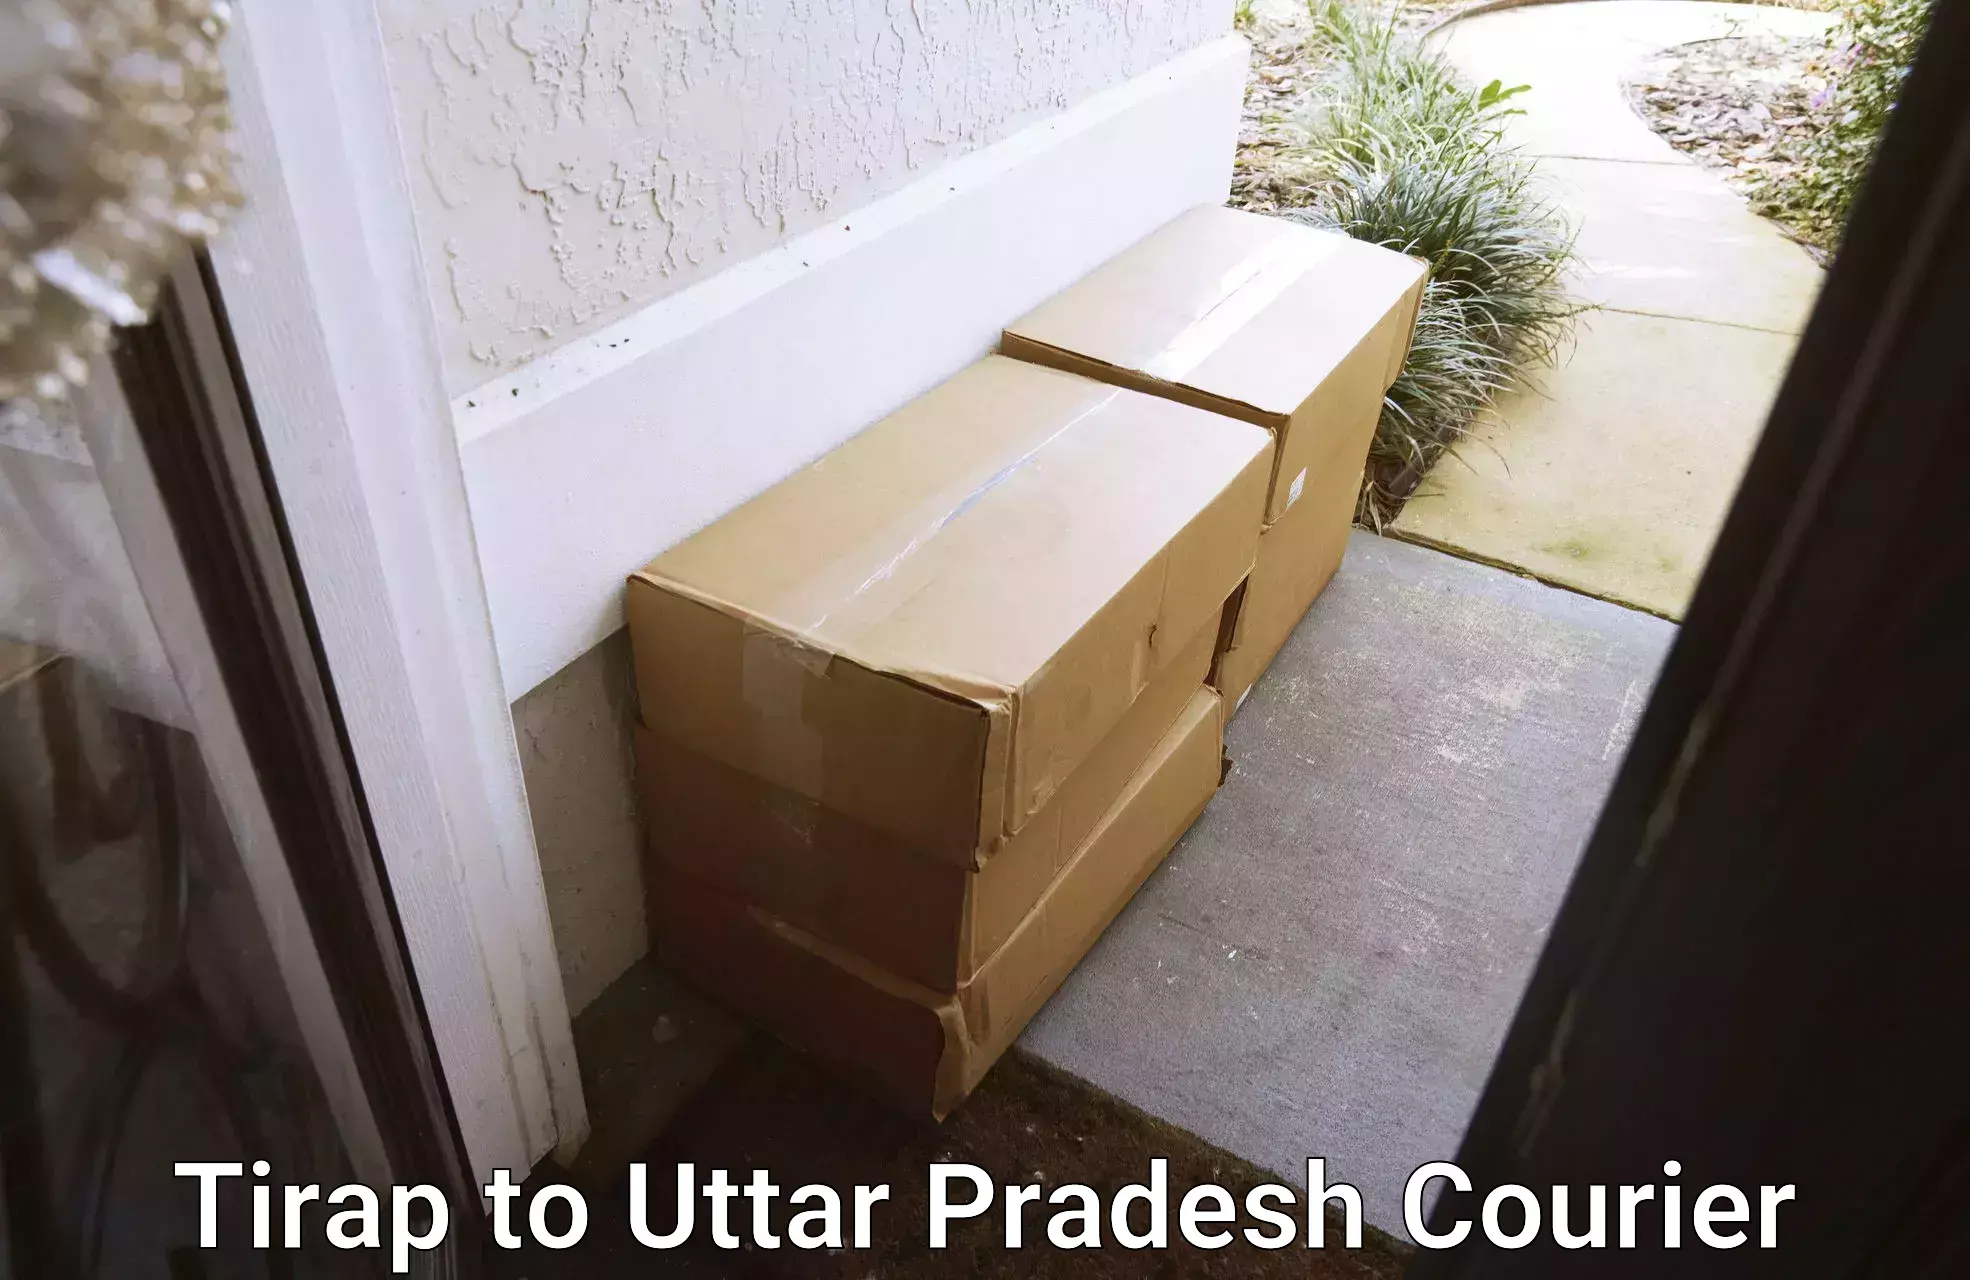 Nationwide parcel services Tirap to Allahabad